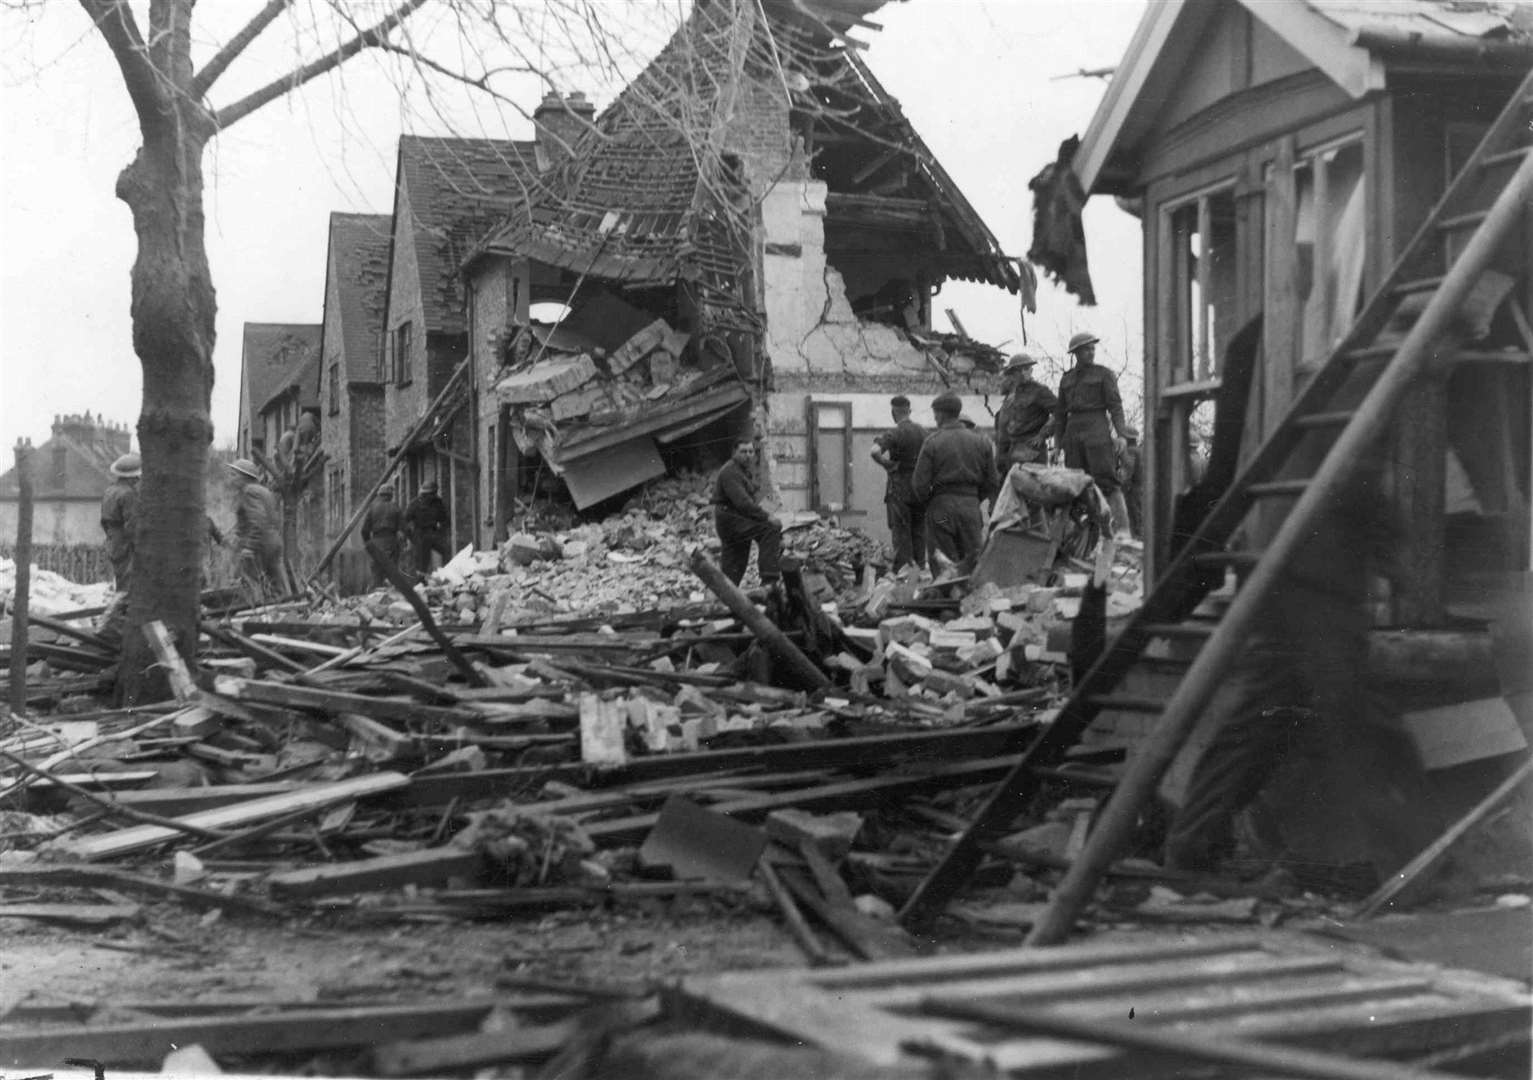 Three days before Christmas 1942, bombers destroyed these homes in Grosvenor Road, Kennington. Picture: Images of Ashford by Mike Bennett